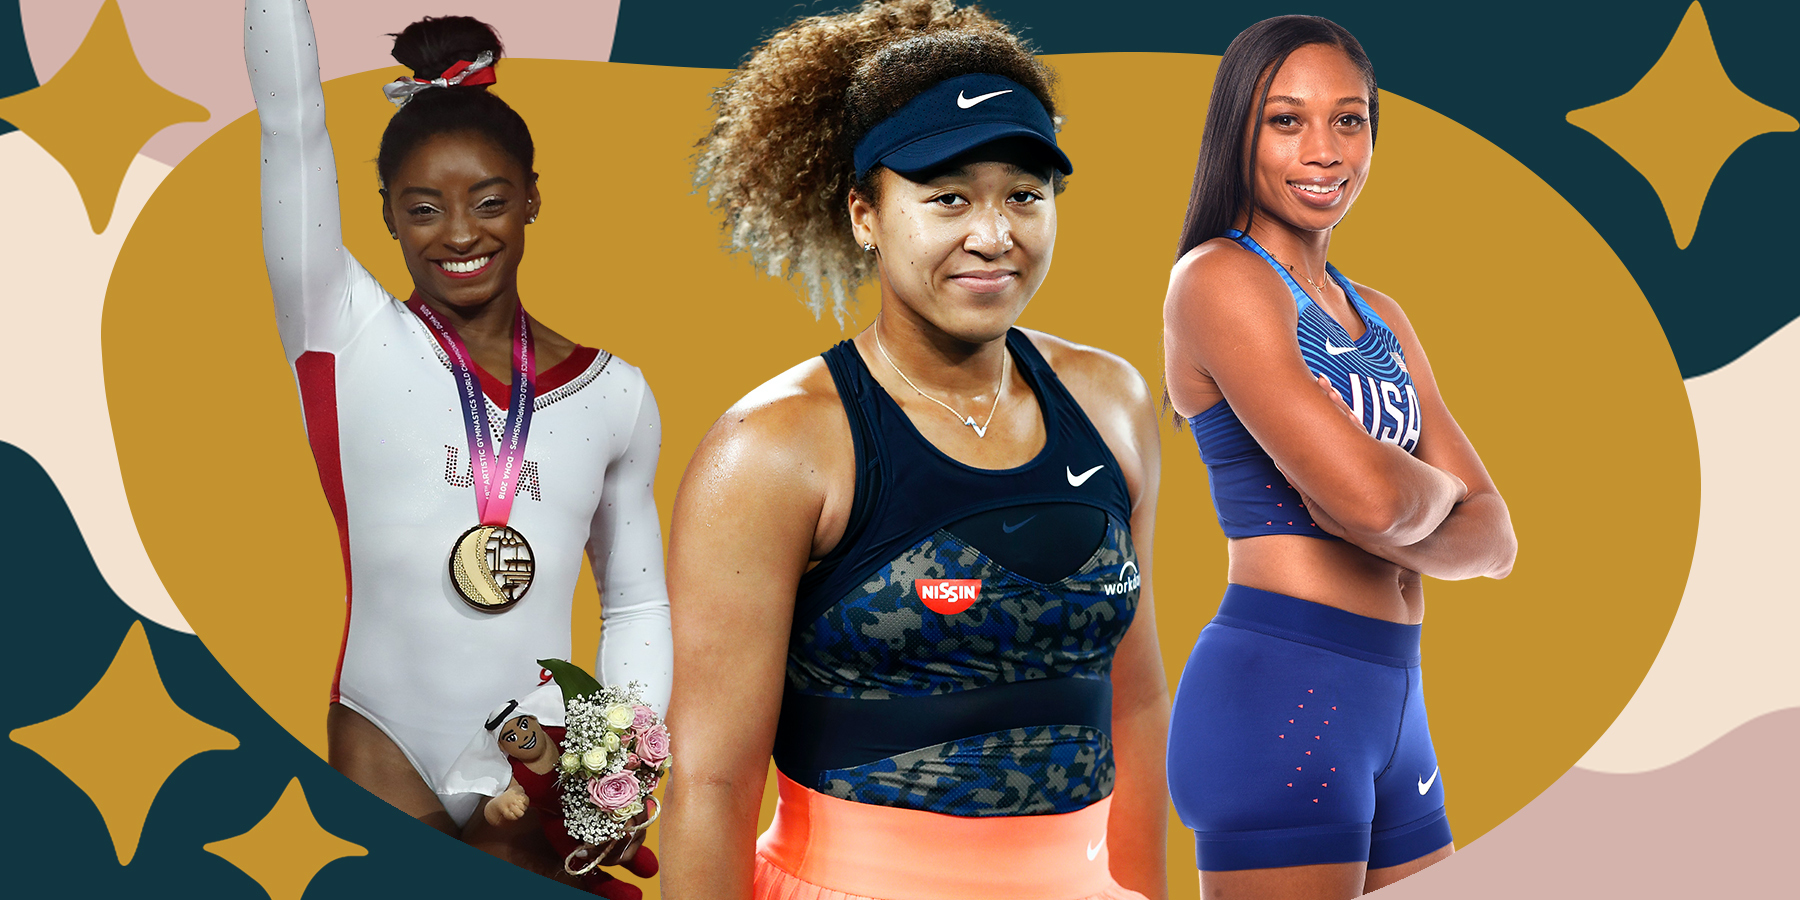 How to Support Black Female Athletes Right NowHelloGiggles